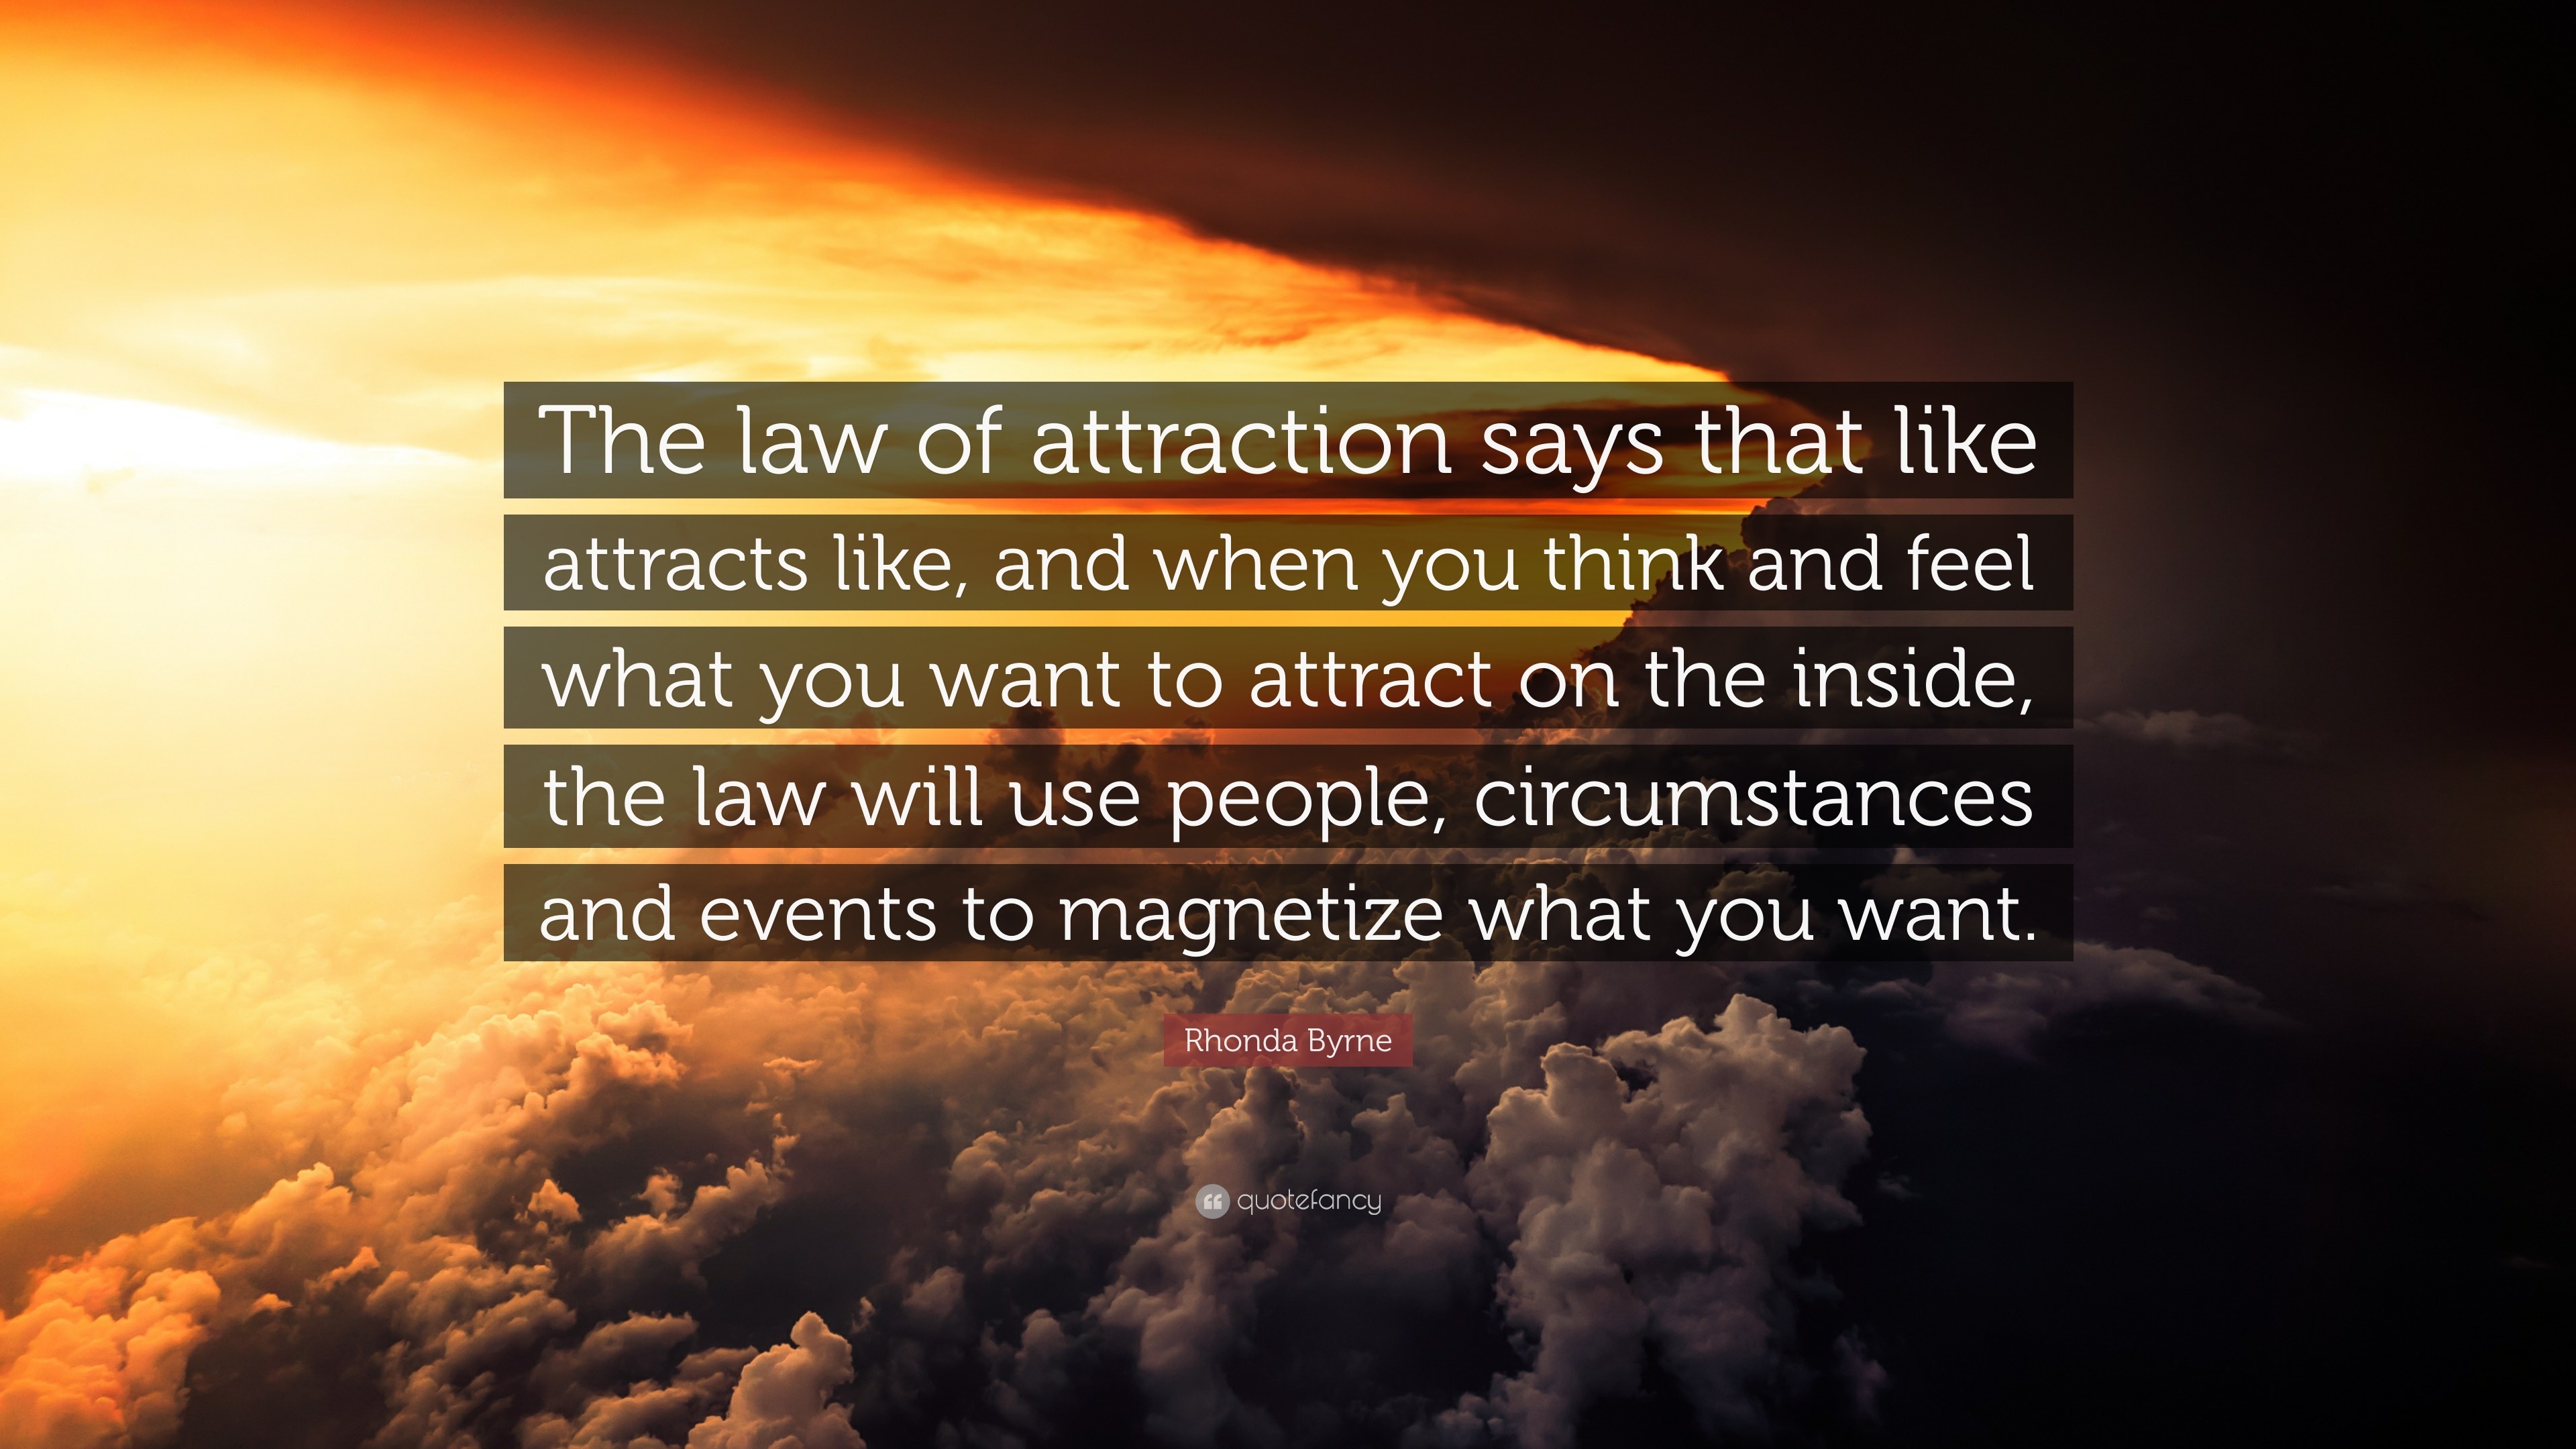 Rhonda Byrne Quote “The law of attraction says that like